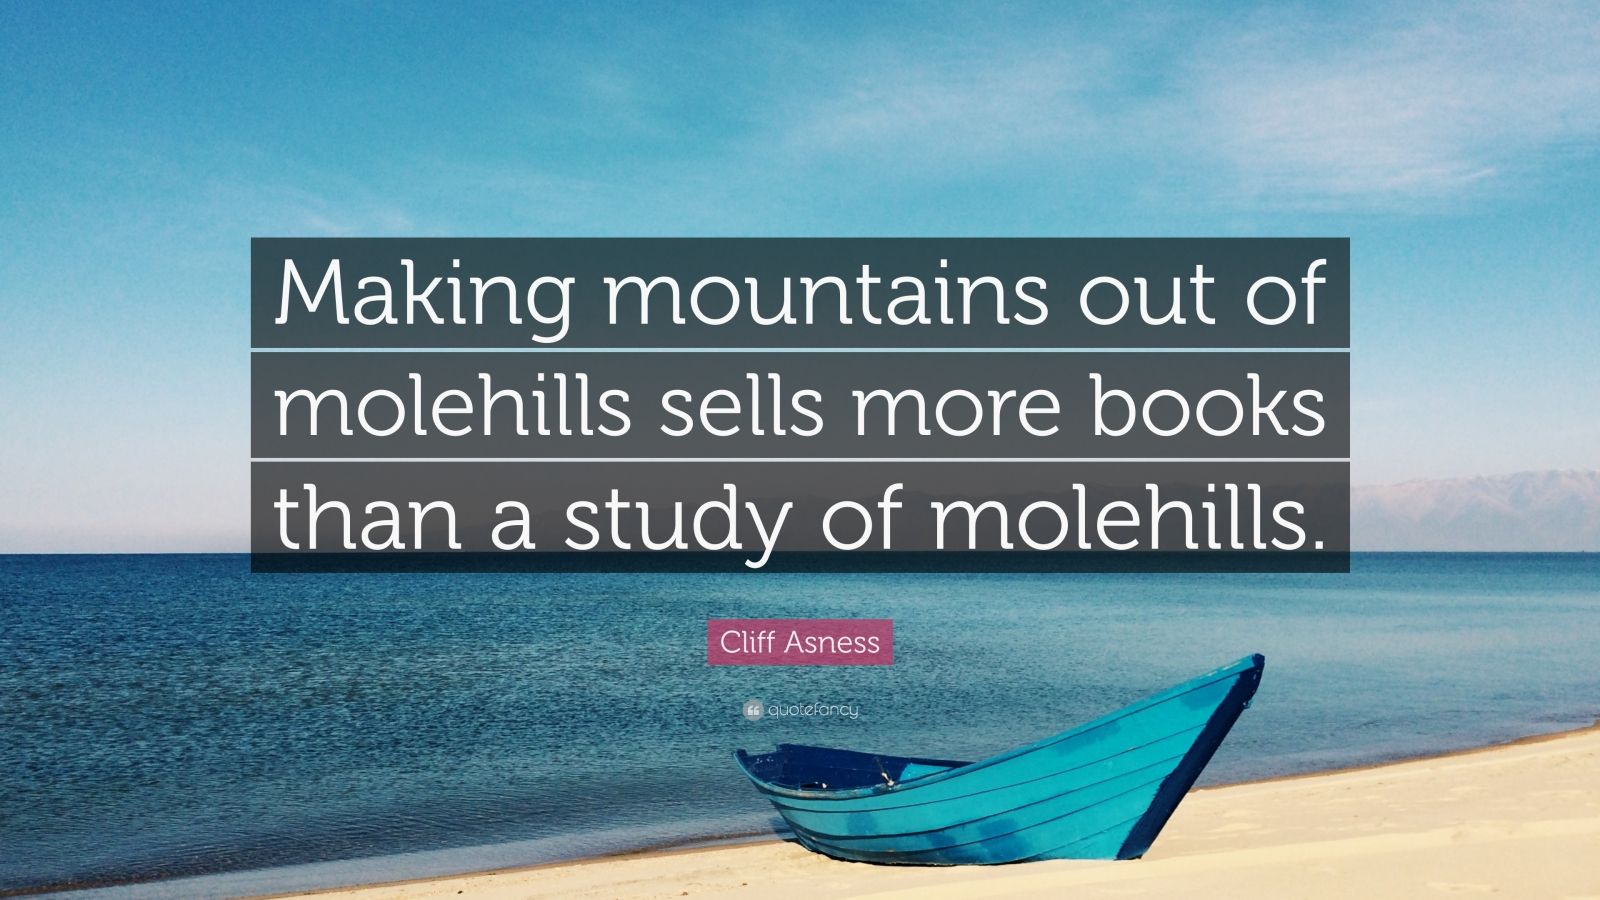 Cliff Asness Quote: “Making mountains out of molehills sells more books ...